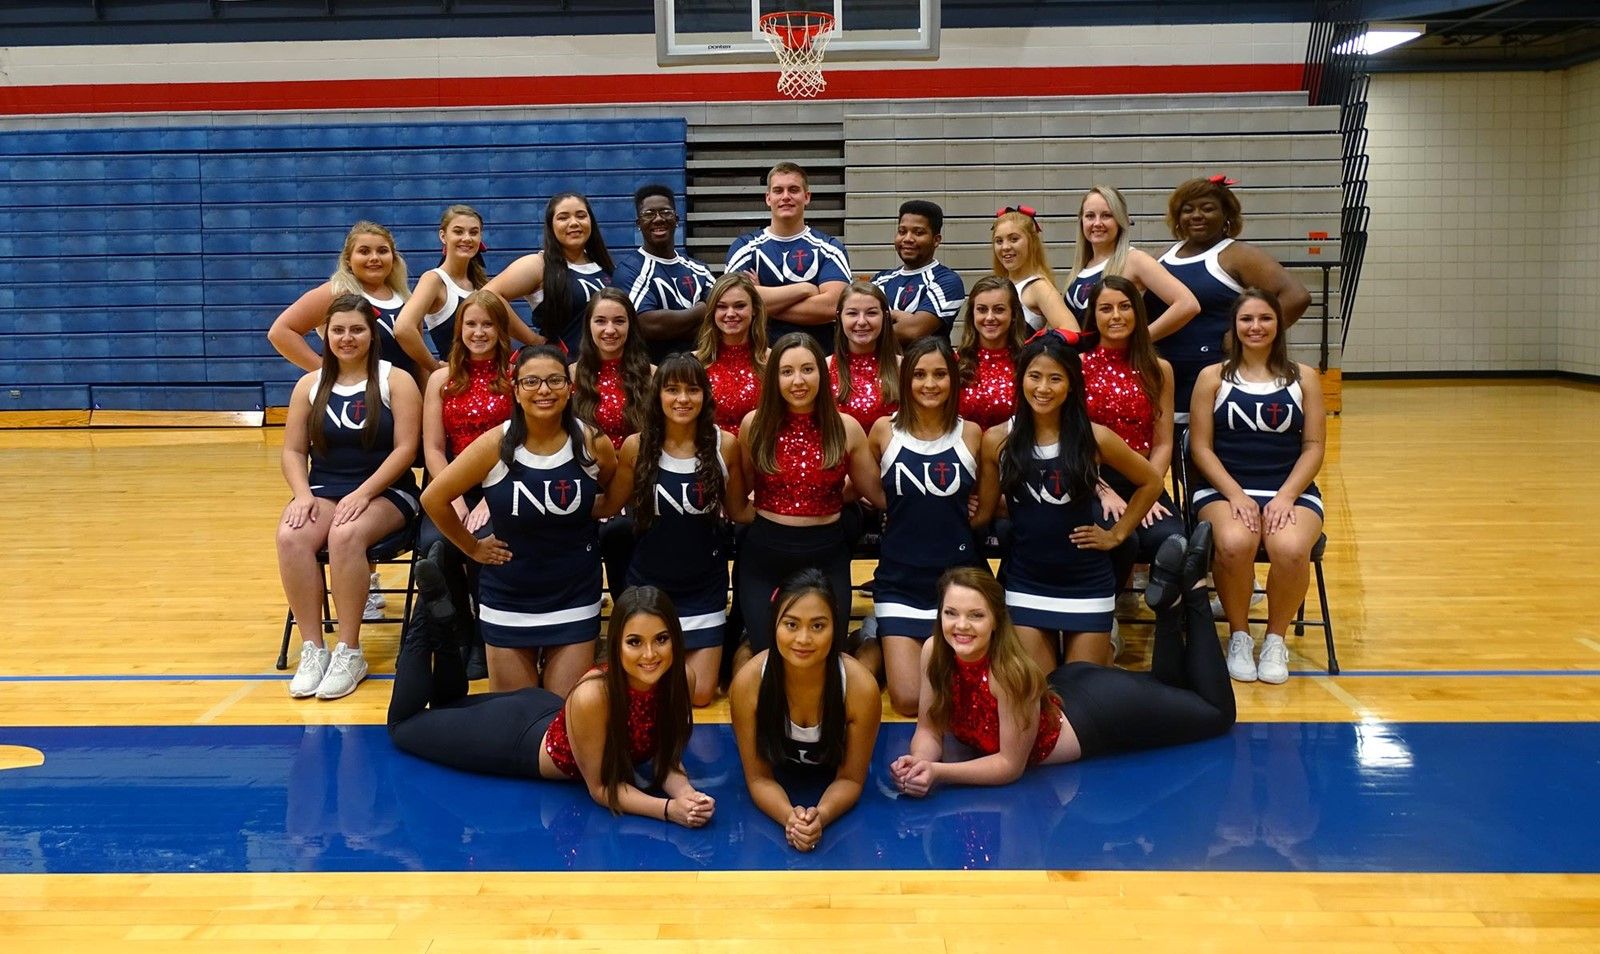 Meet the cheer and dance team: the faces of Jet pride